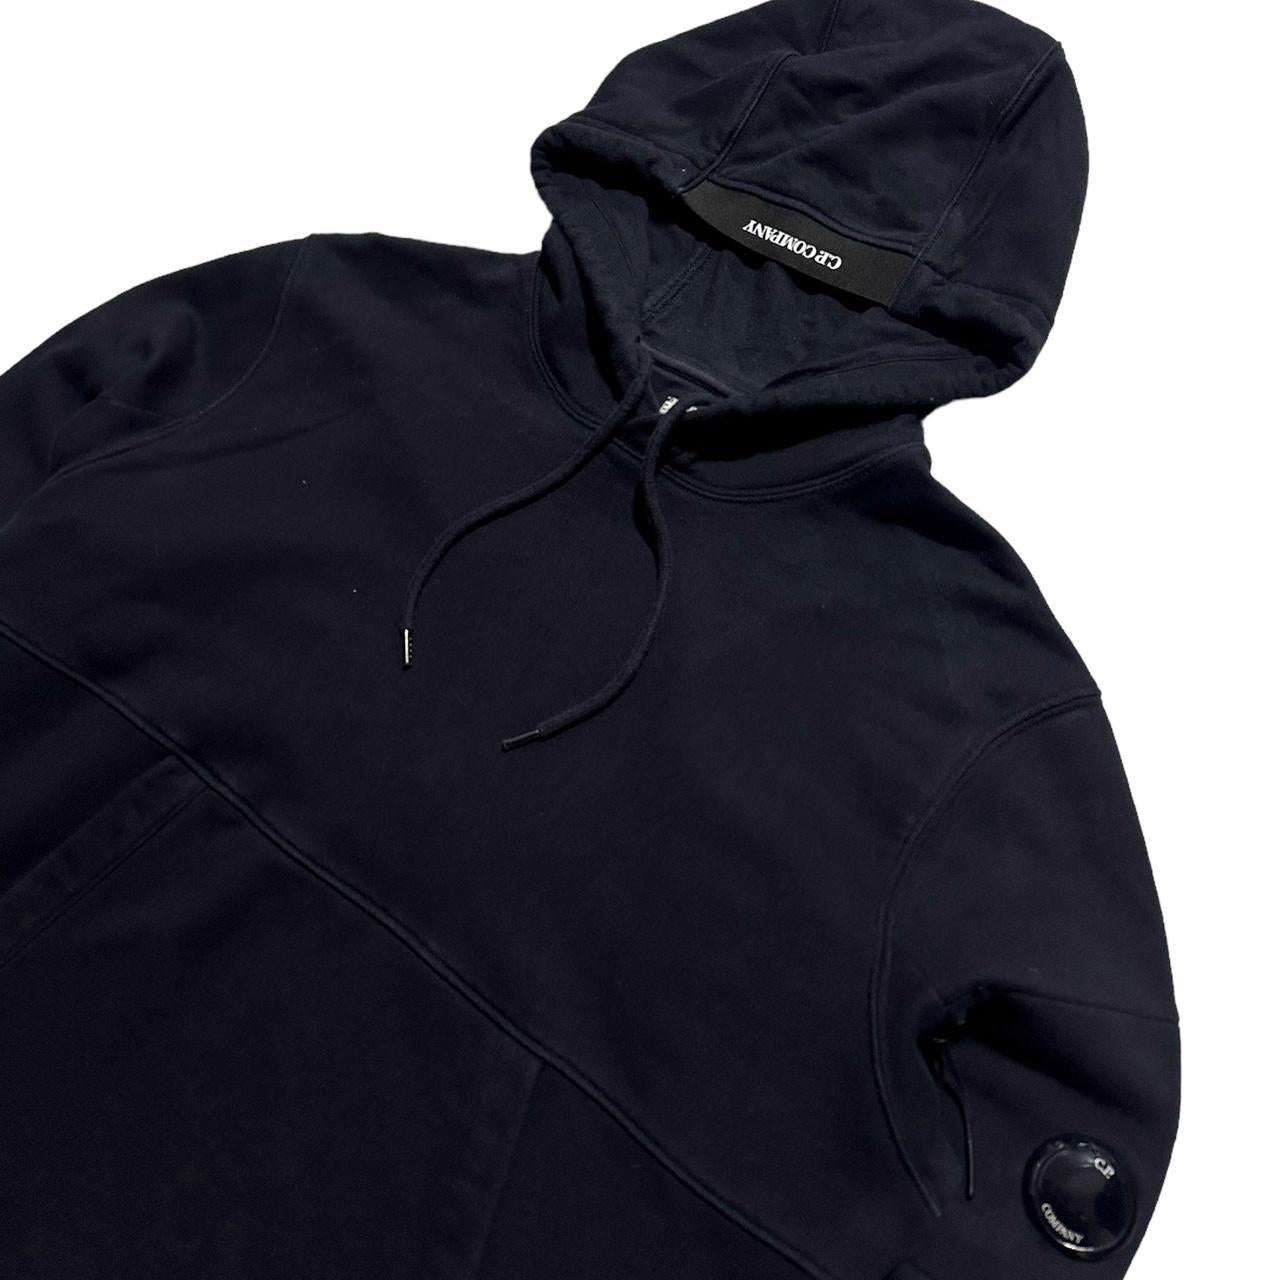 CP Company Micro Lens Pullover Cotton Hoodie